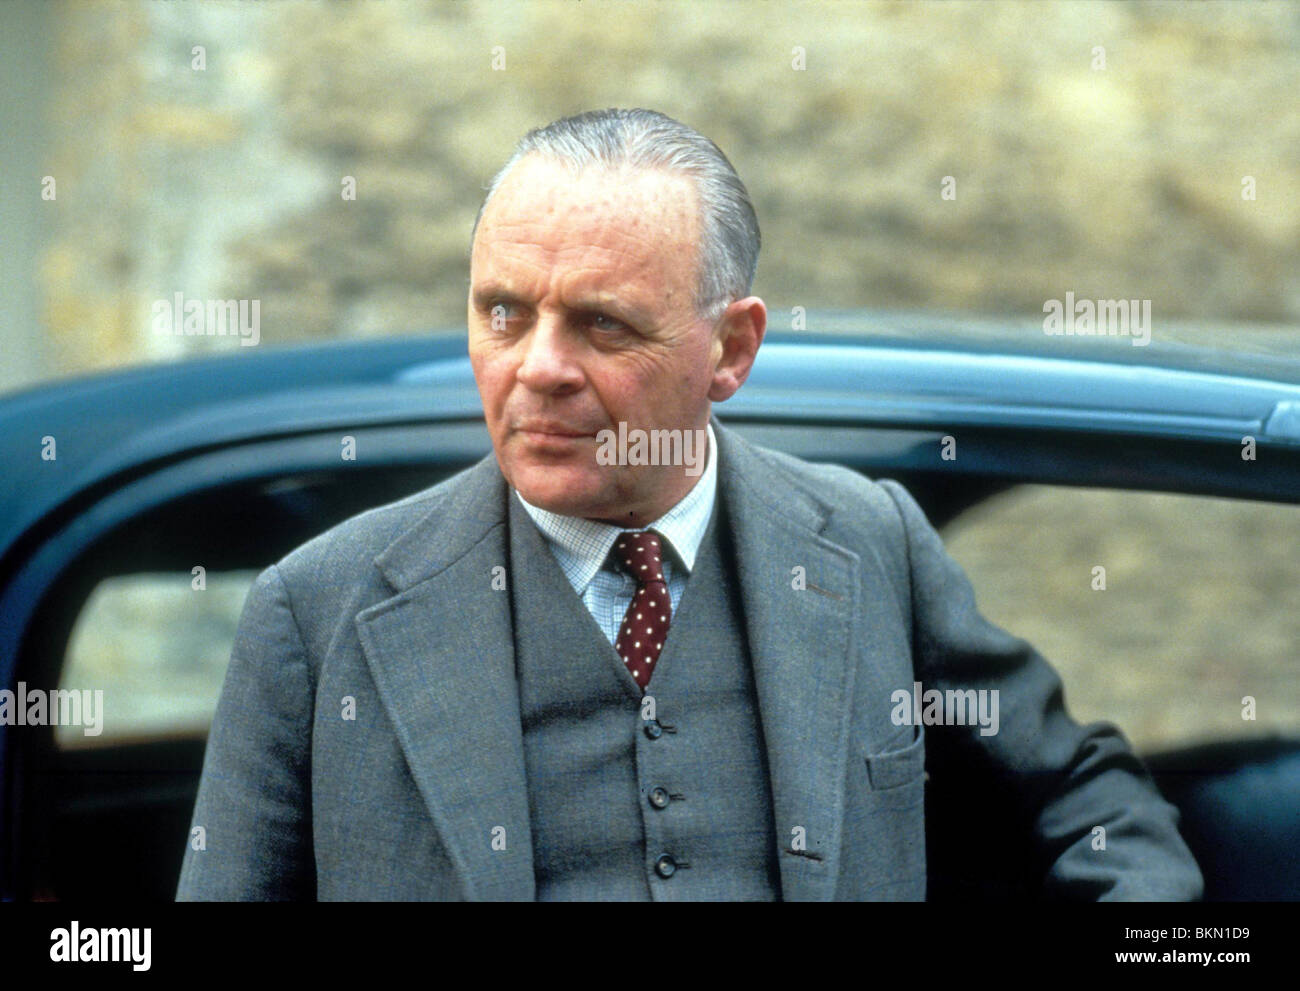 THE REMAINS OF THE DAY (1993) ANTHONY HOPKINS RMD 008 Stock Photo